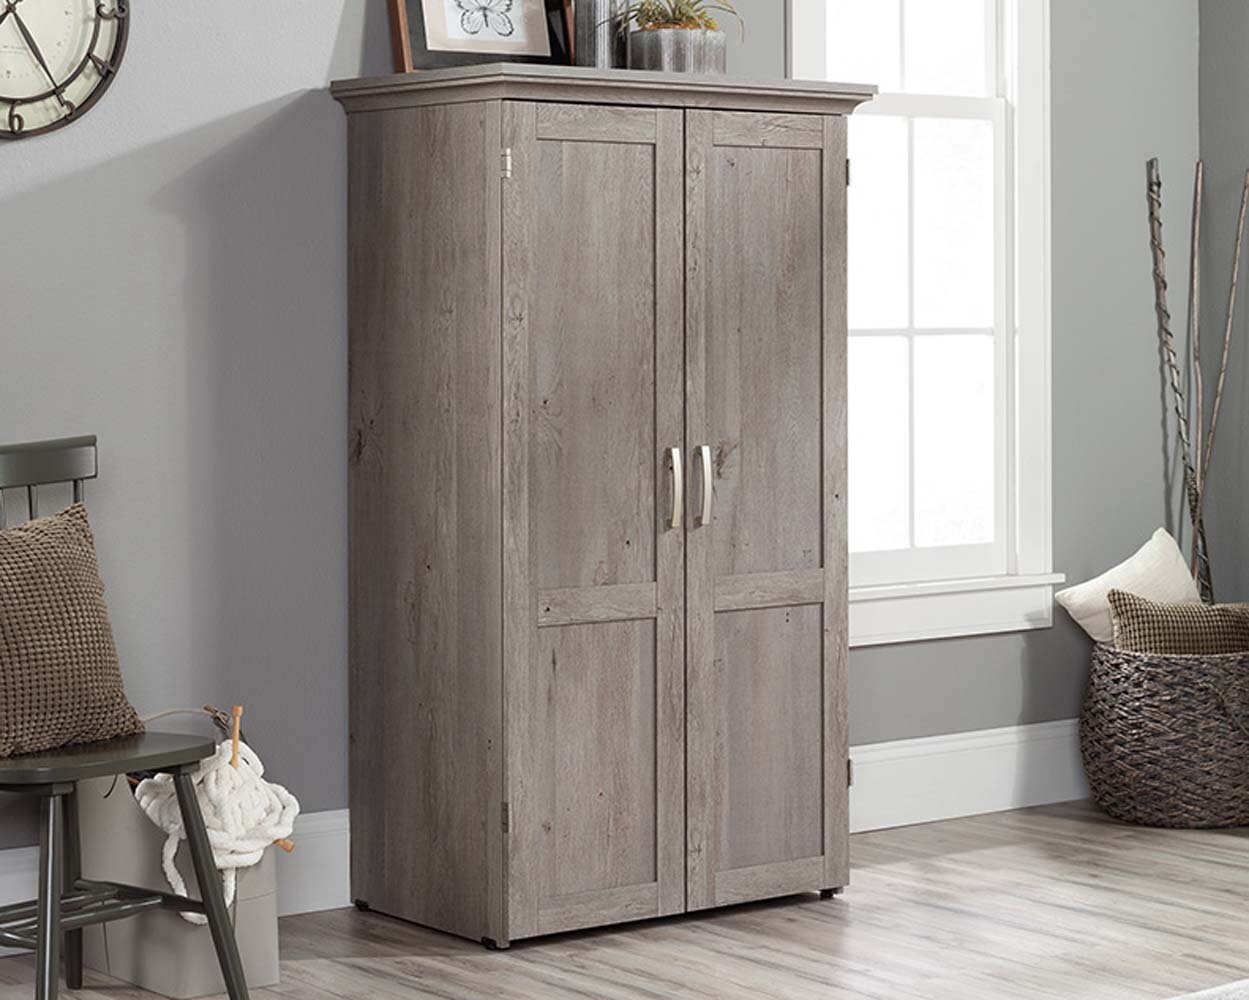 The Ultimate Craft Station Cabinet  Craft storage cabinets, Craft armoire, Arts  and crafts storage